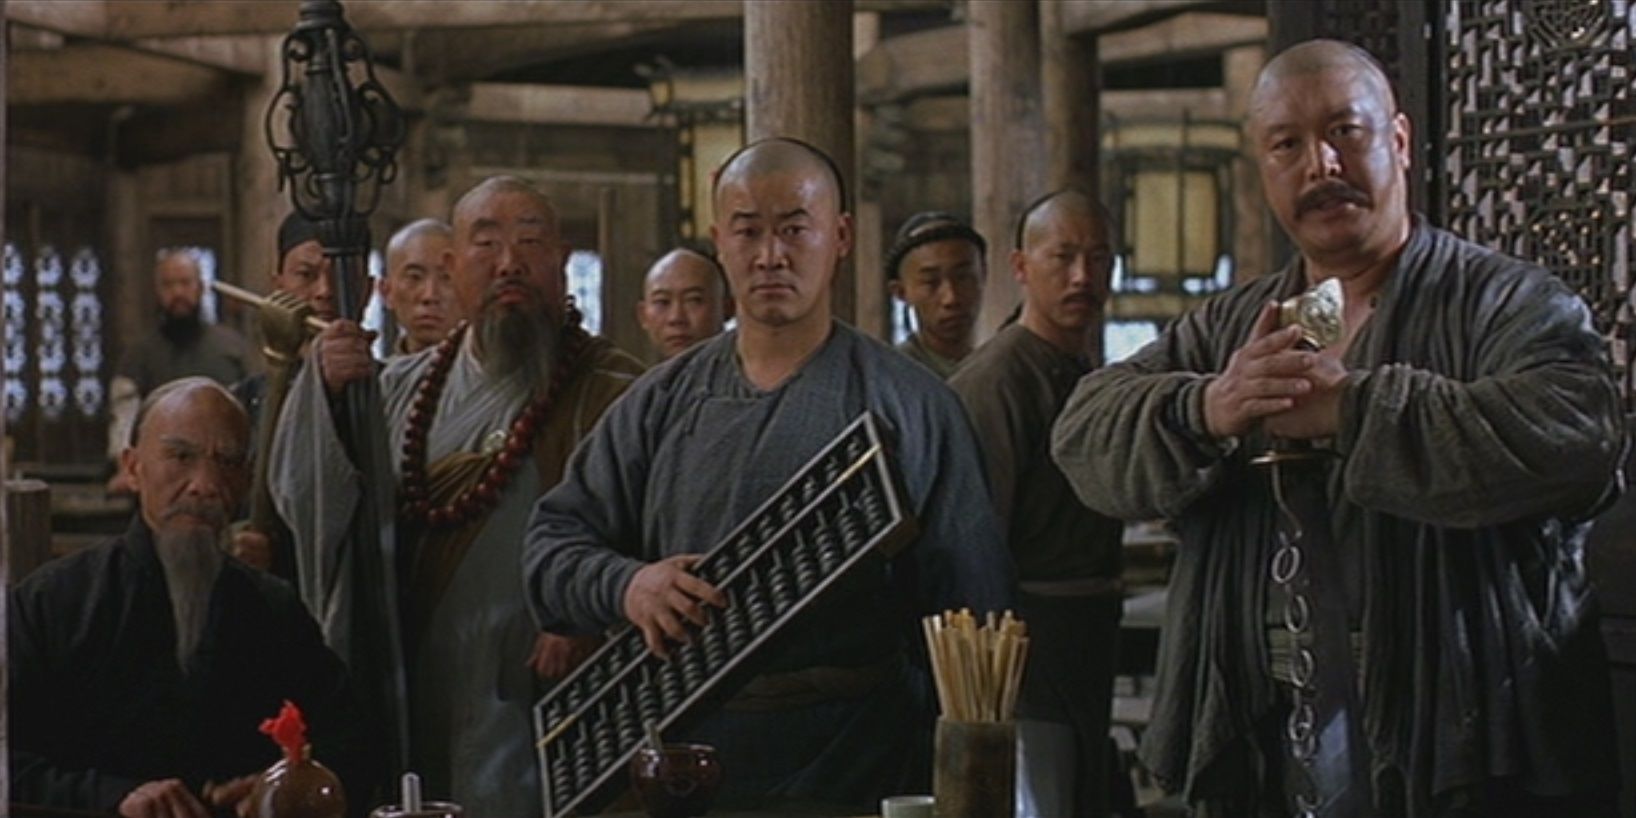 Crouching Tiger Hidden Dragon fighters lining up in tea house